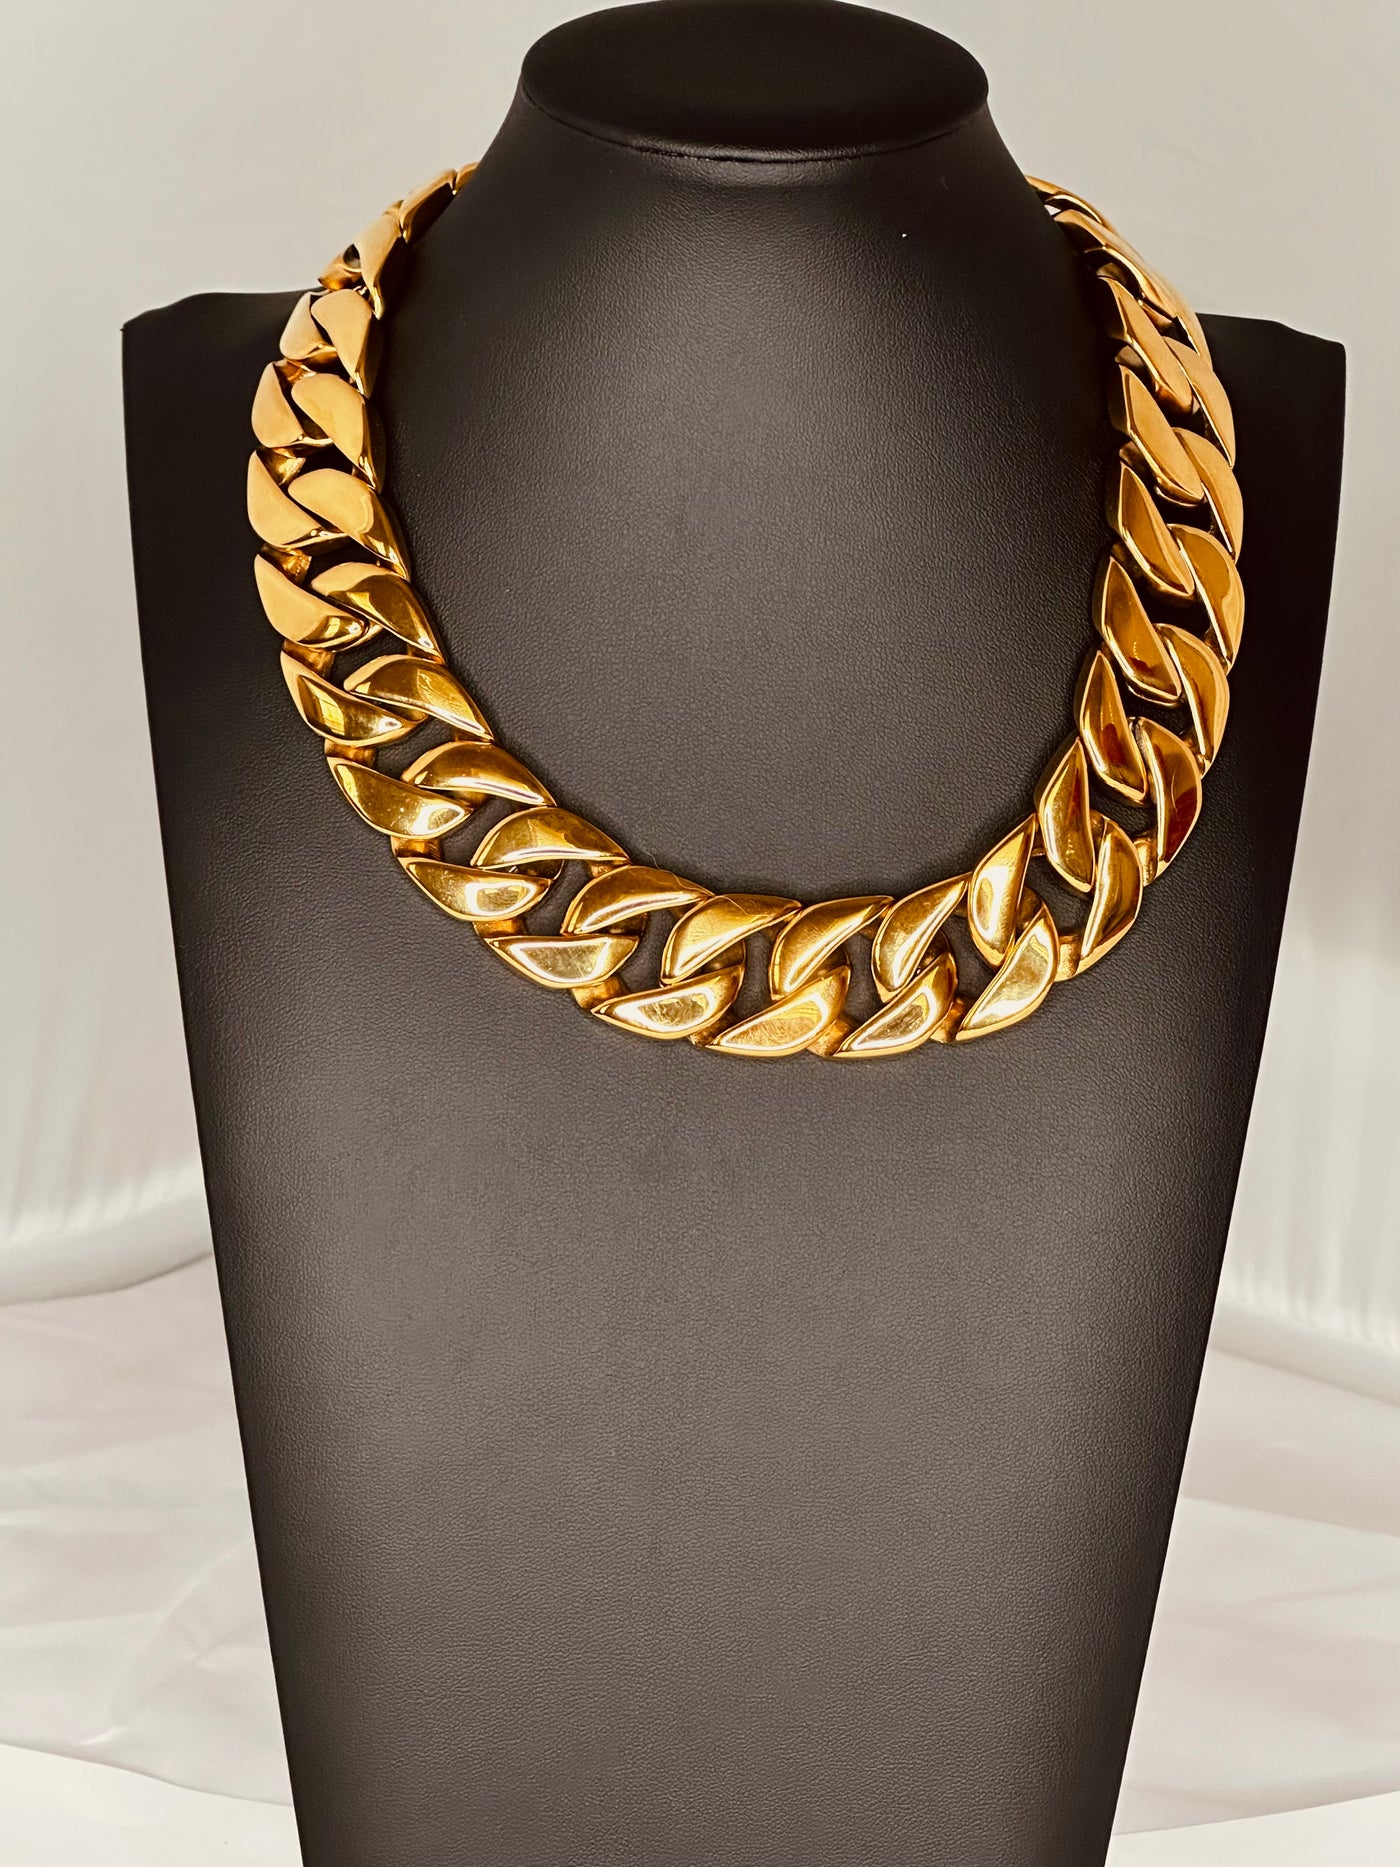 Heavy Duty Gold Plated Stainless Steel Necklace